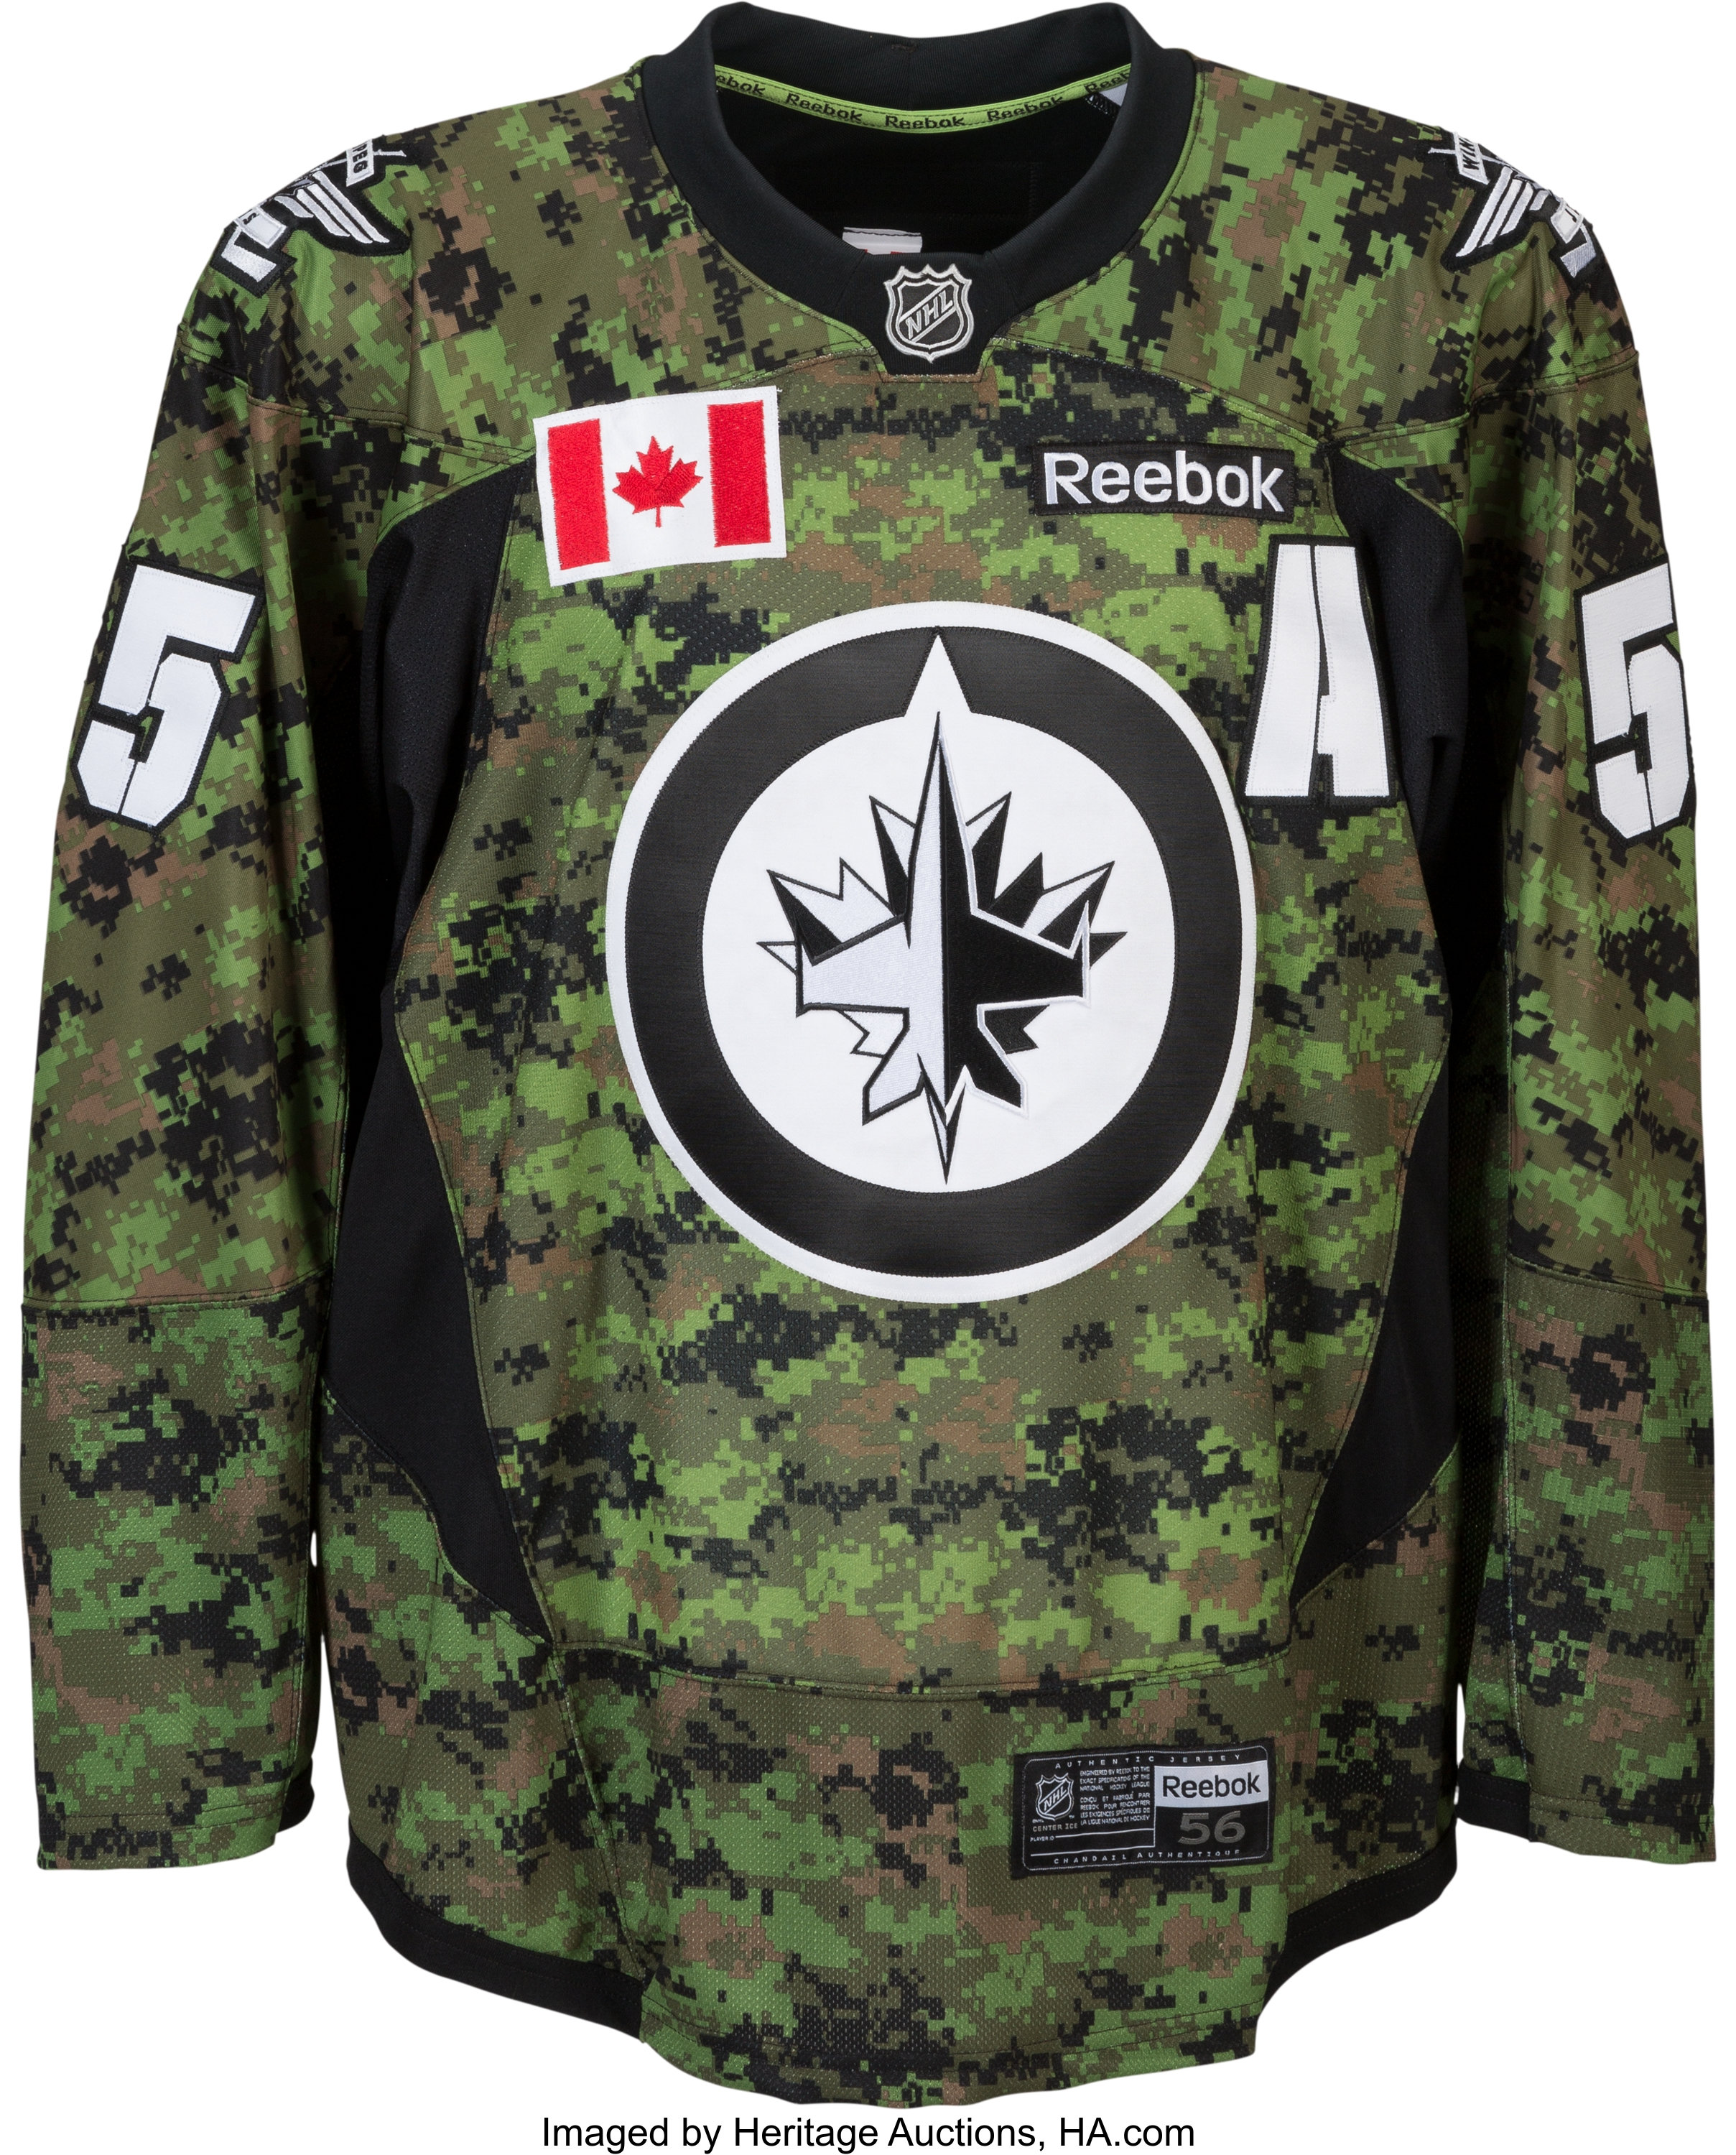 Petition to make this the new Standard Winnipeg Jets Uniform. Best